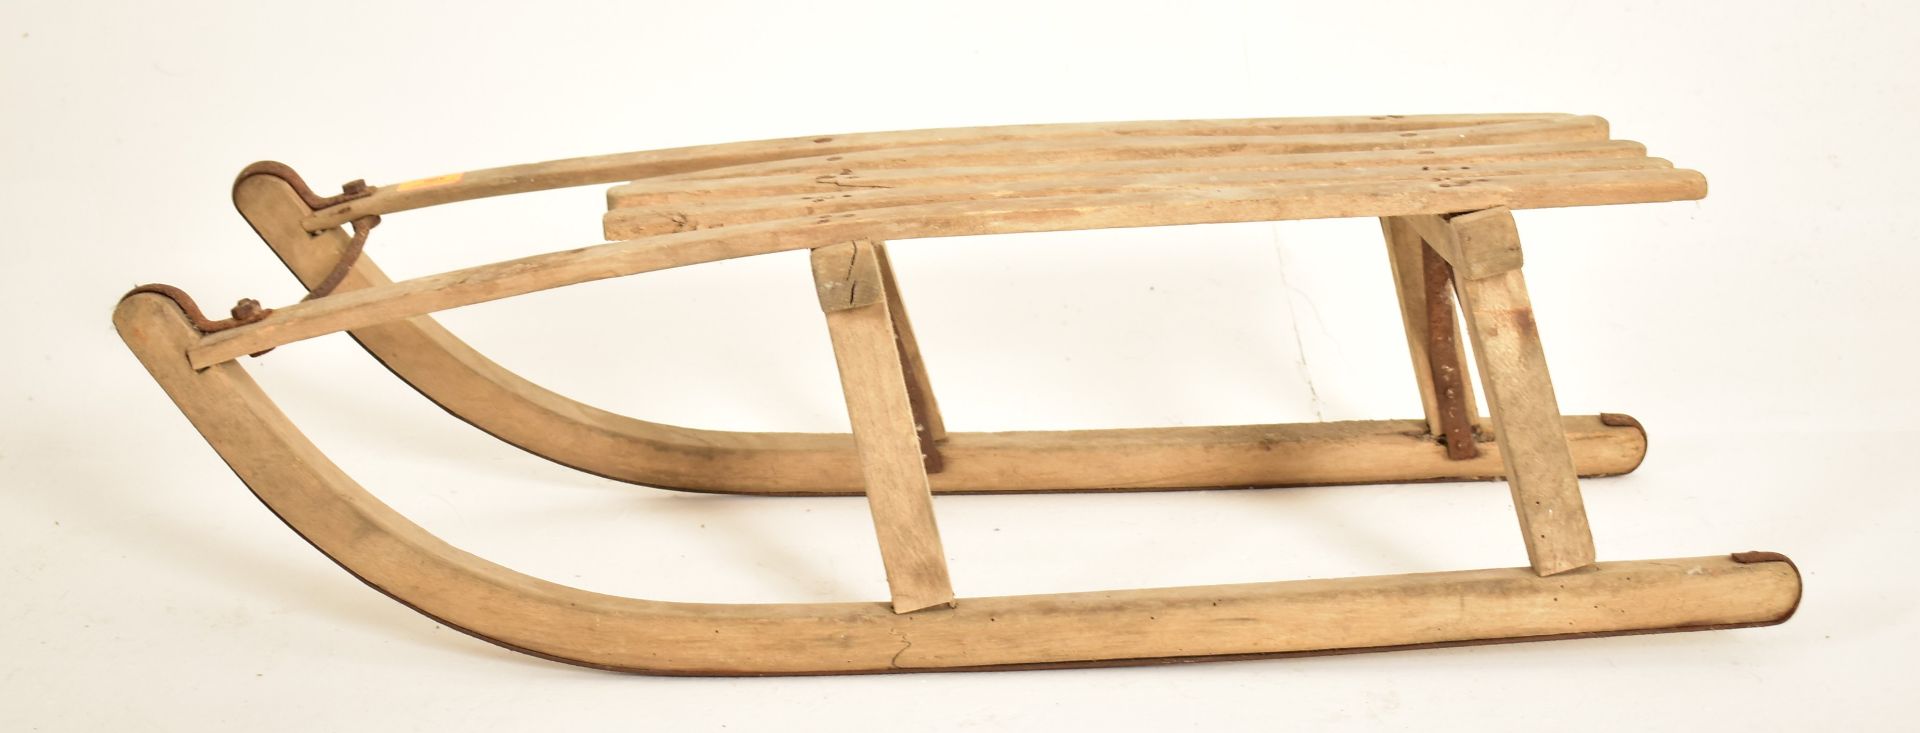 SELECTION OF VINTAGE WOODEN AND METAL SLEIGHS - Image 5 of 7